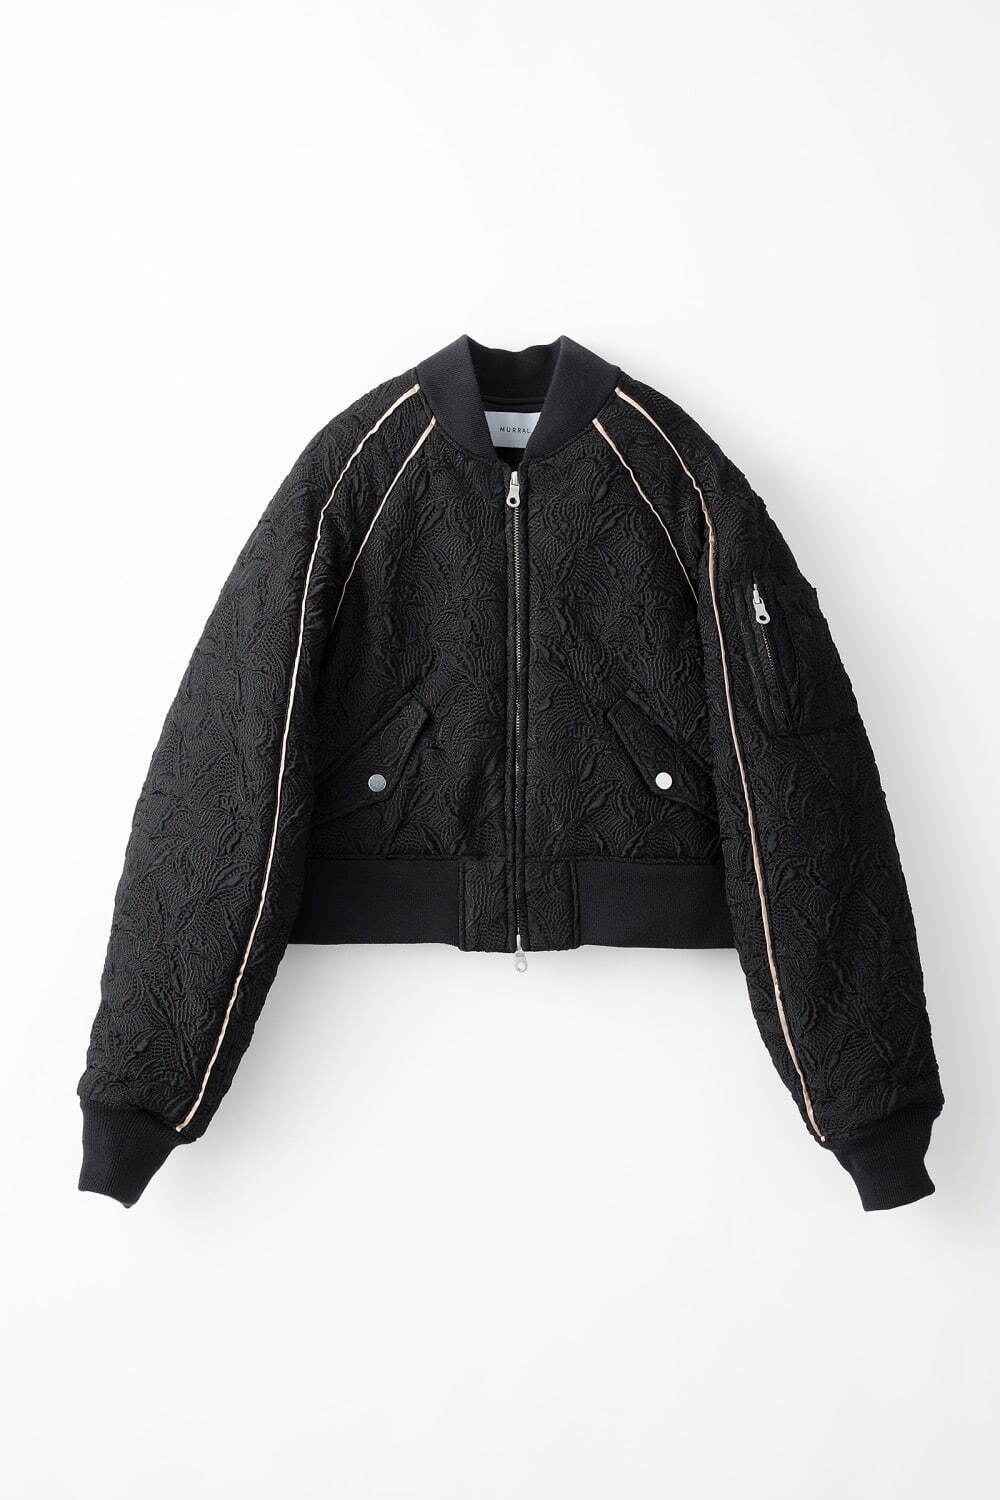 Thawing embroidery flight jacket 75,900円